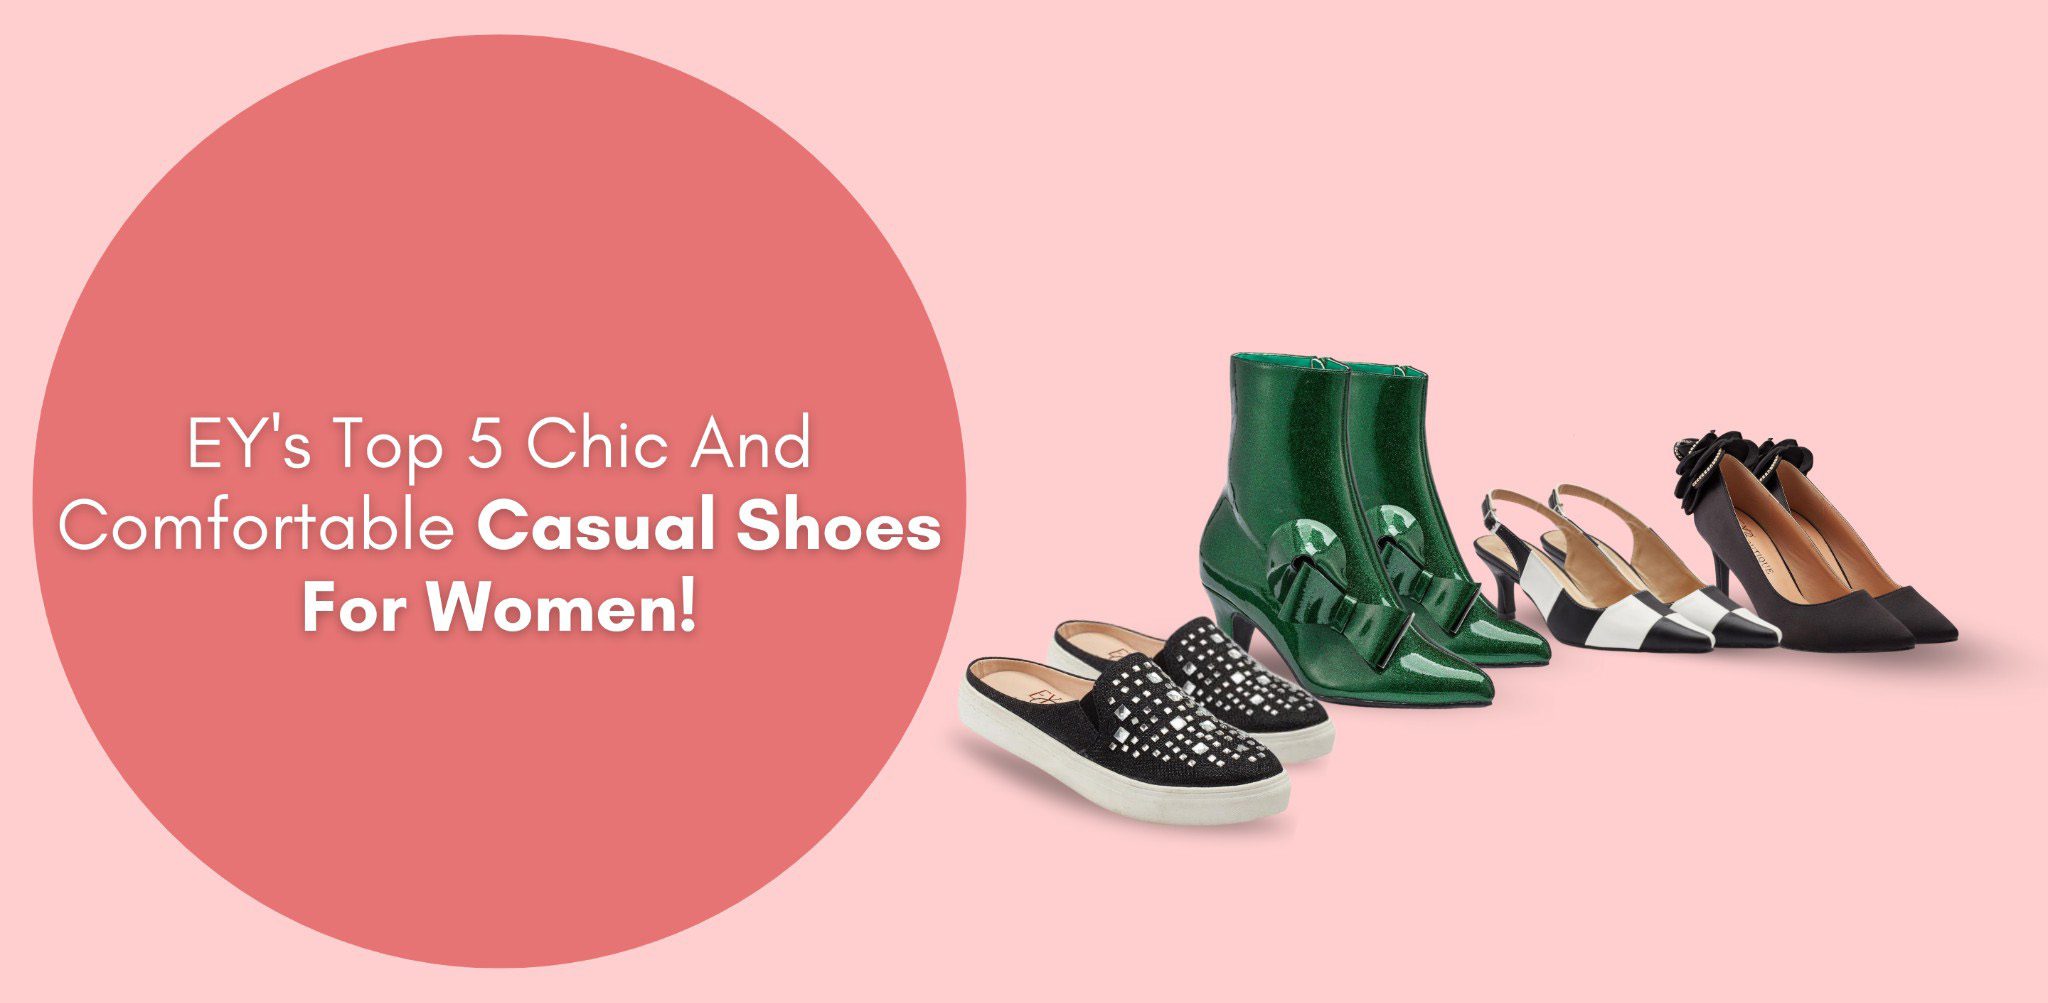 EYs Top 5 Chic and Comfortable Casual Shoes for women